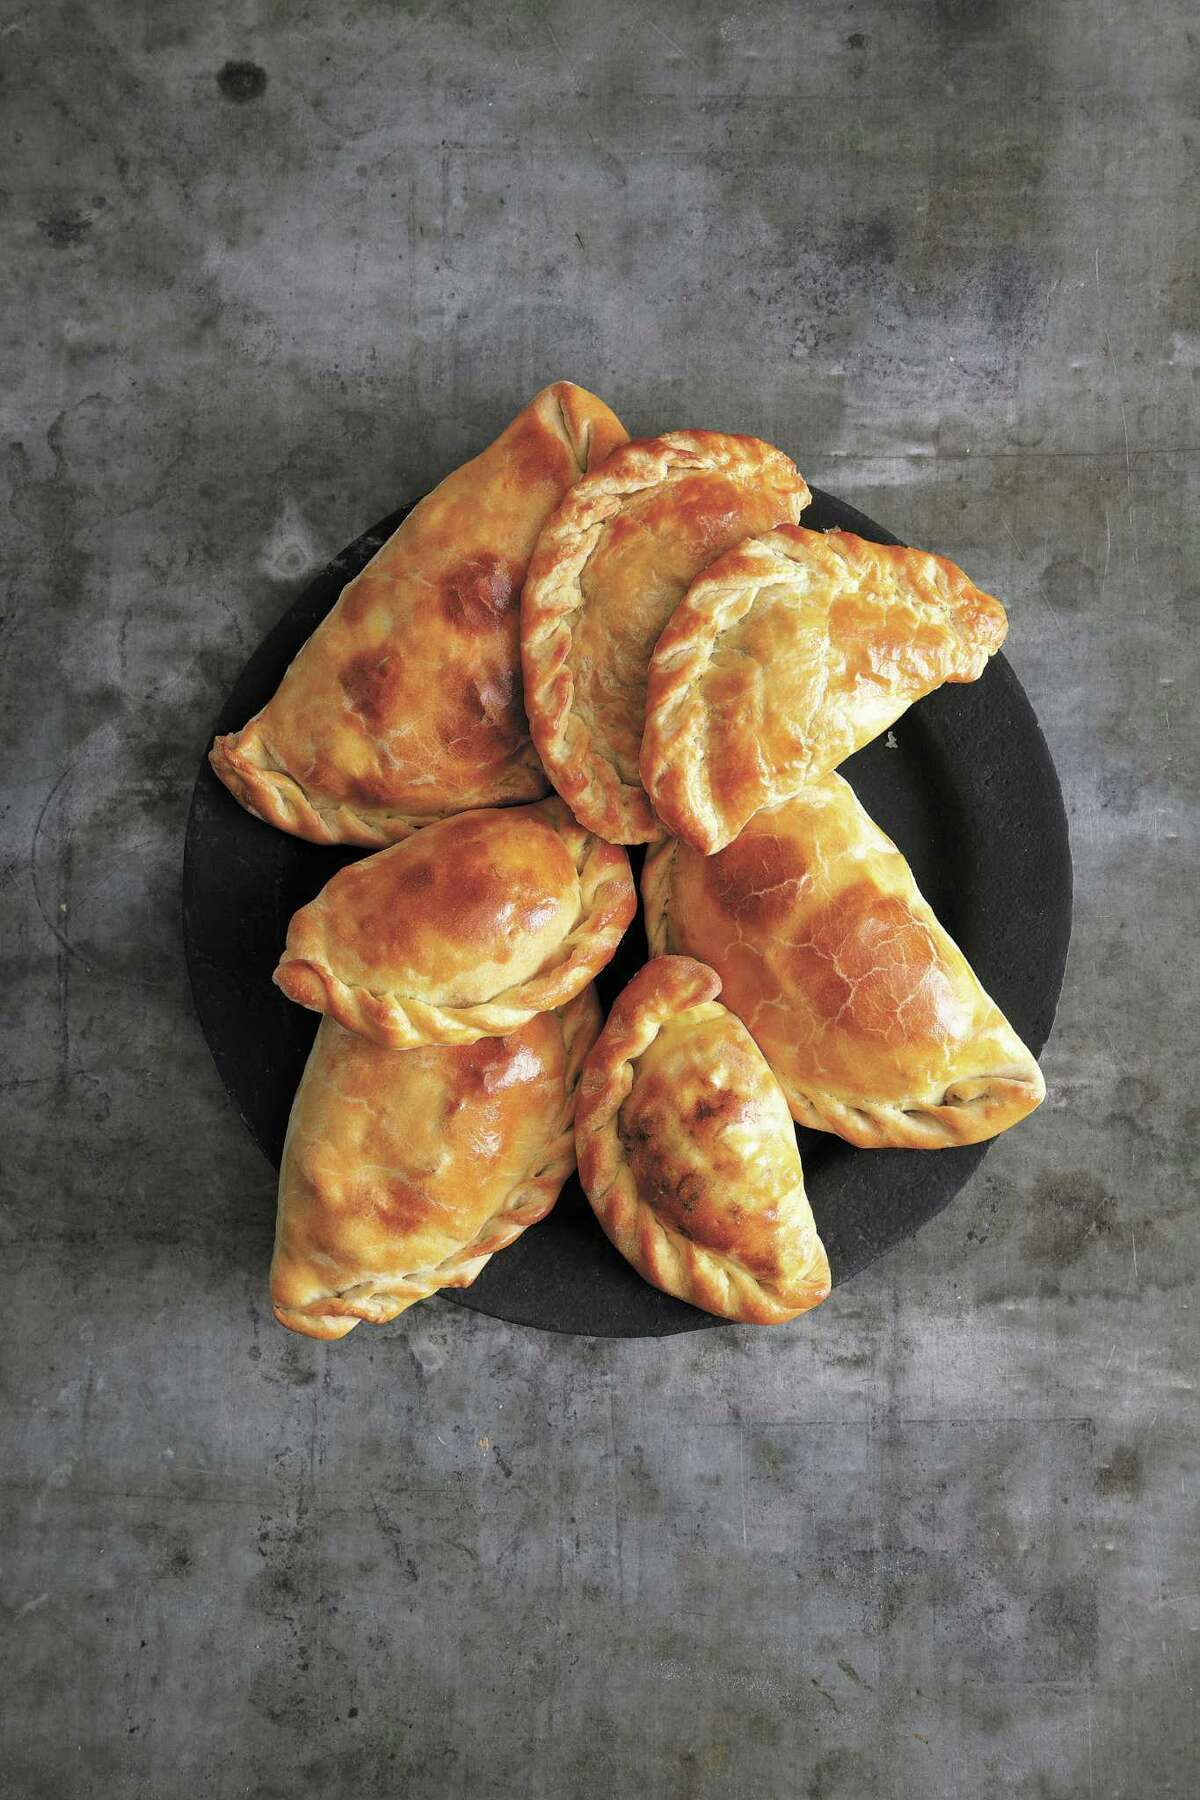 Argentine Chicken Empanadas from “Pastry: Foolproof Recipes for the Home Cook” by Nick Malgieri